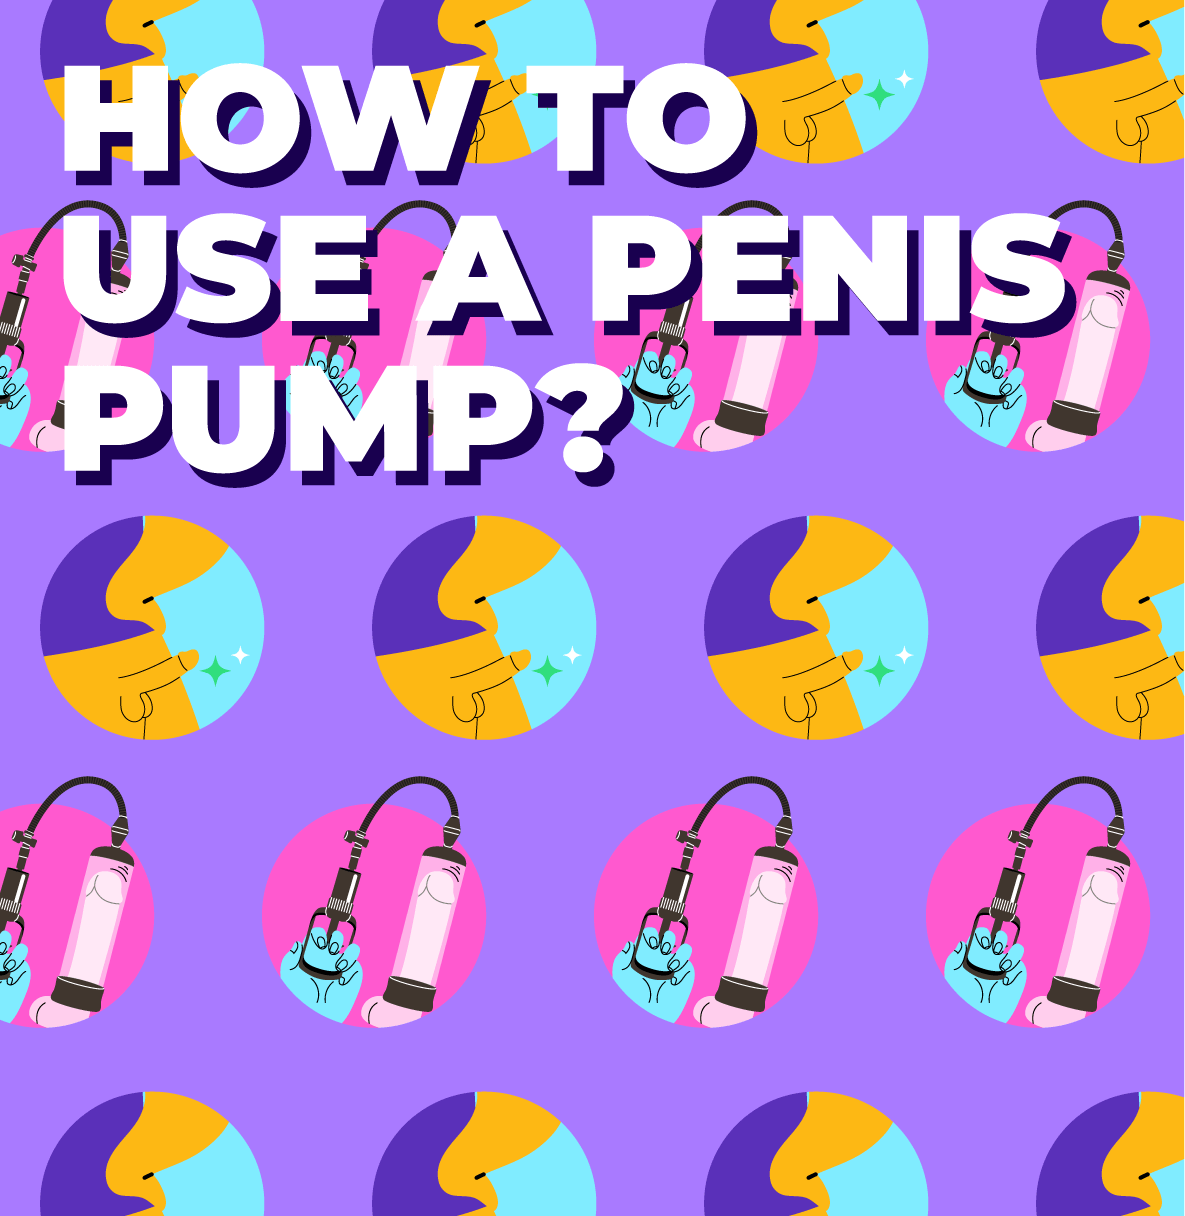 How to Use A Penis Pump